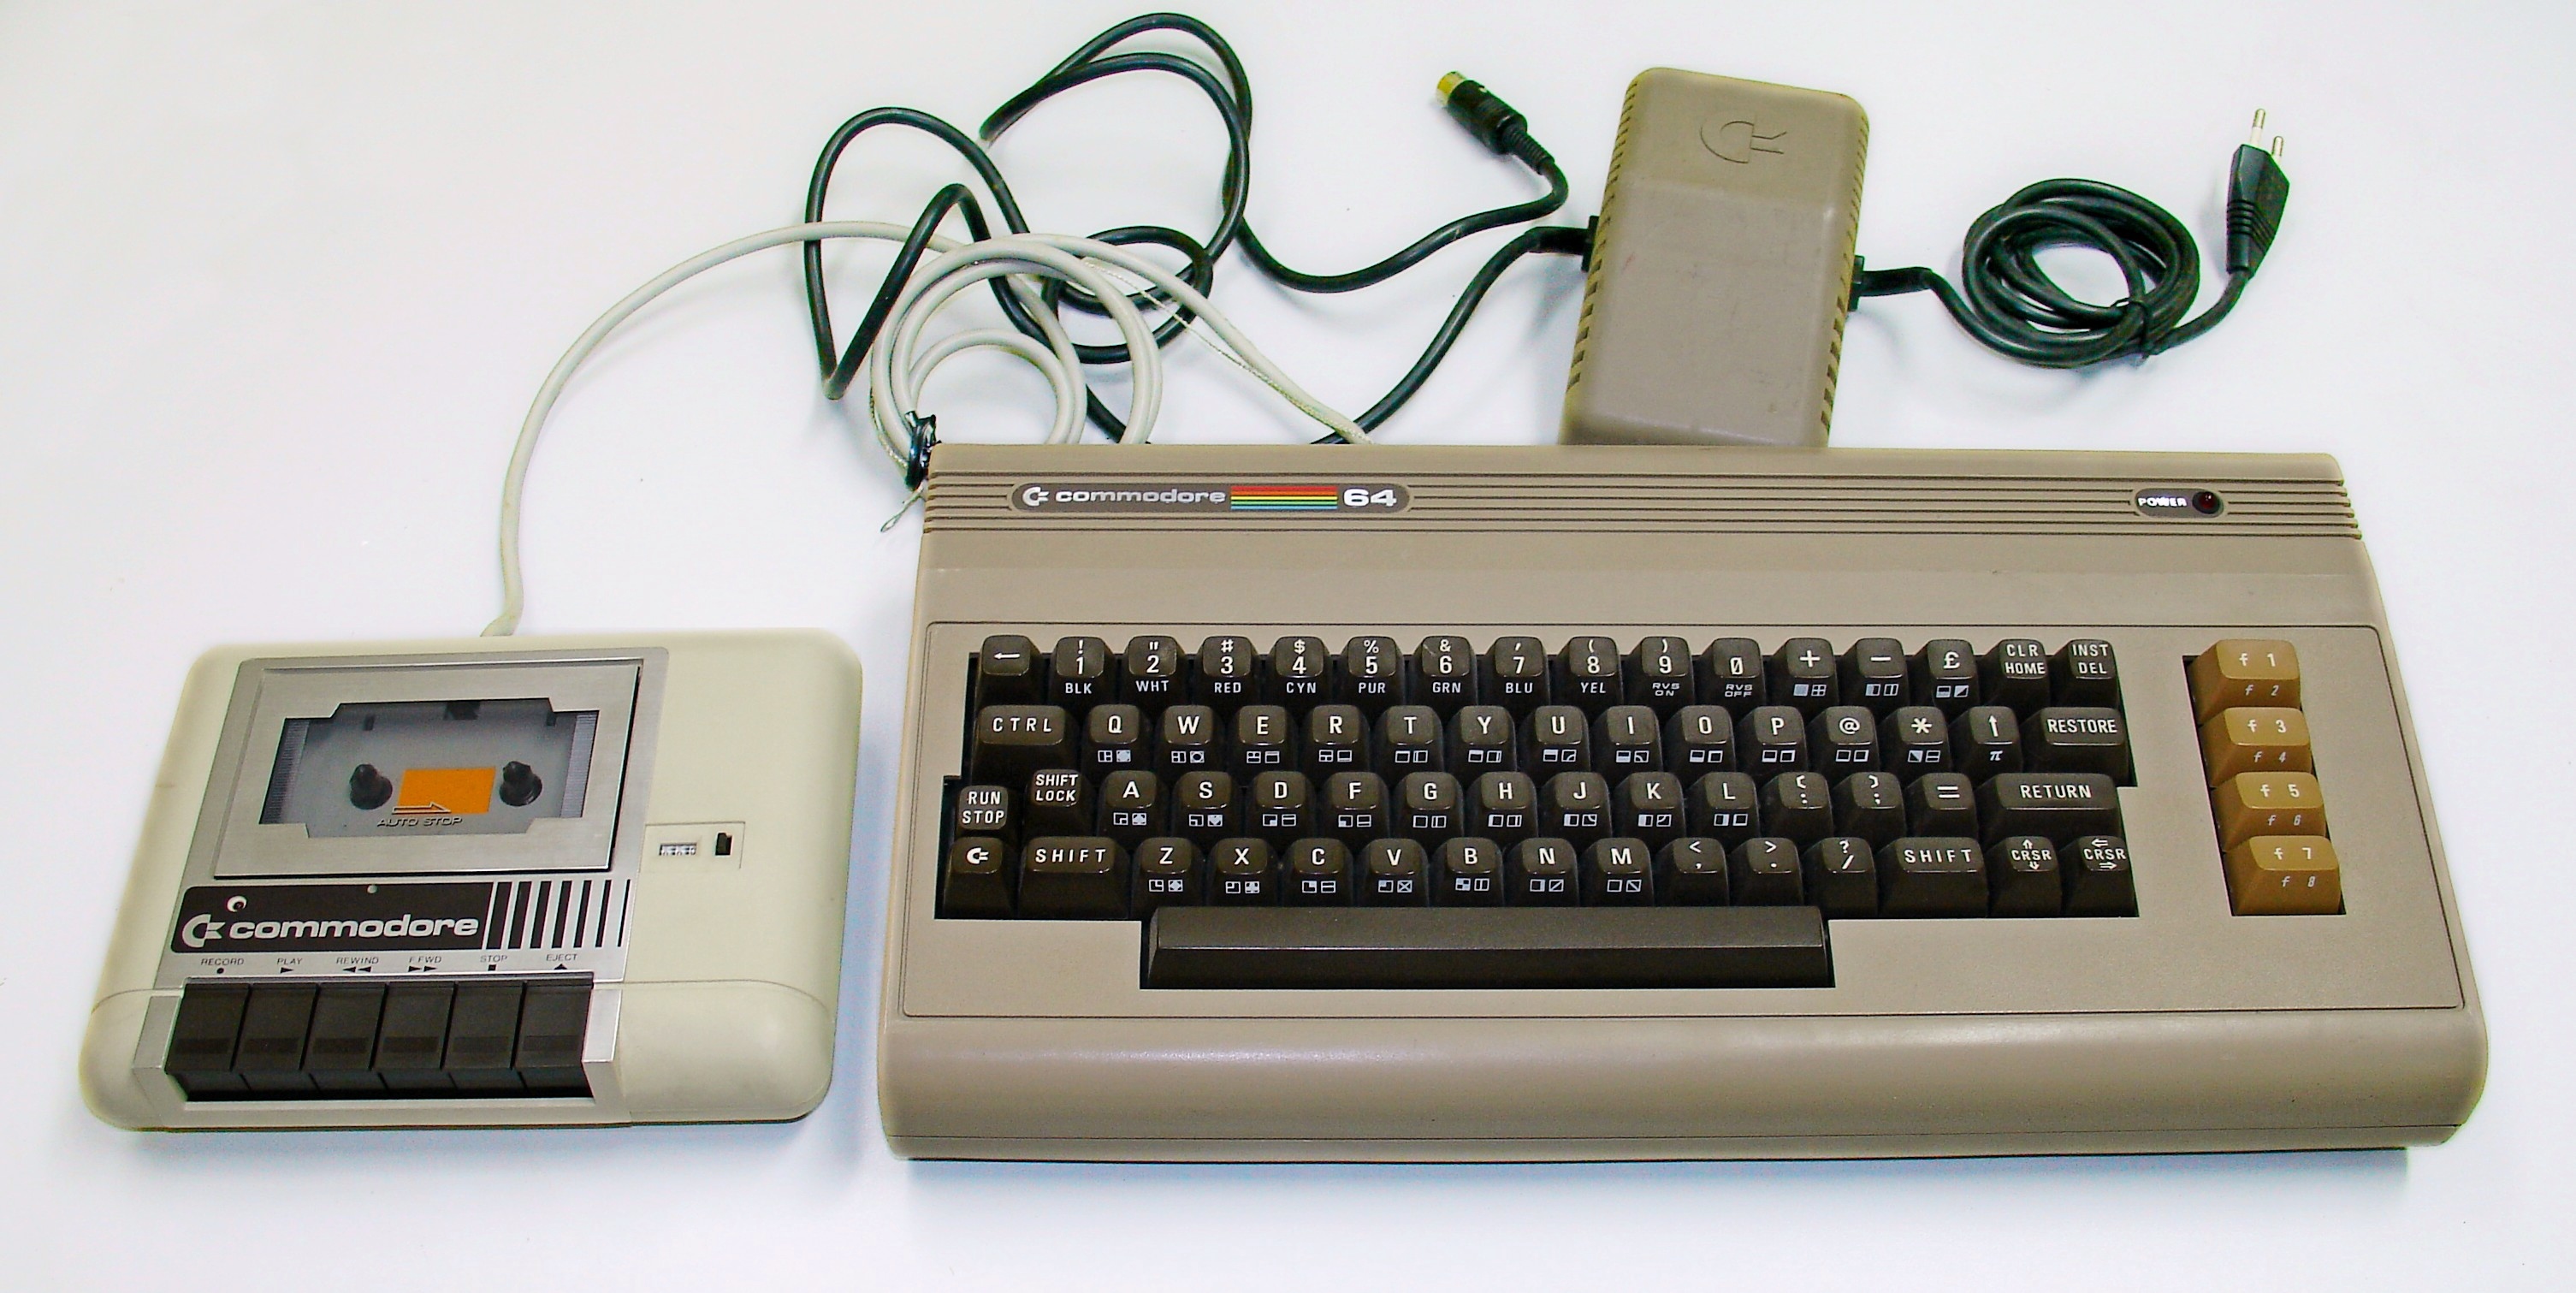 Commodore_64_with_the_external_power_supply_and_Commodore_1530_(C2N)_Datasette.jpg